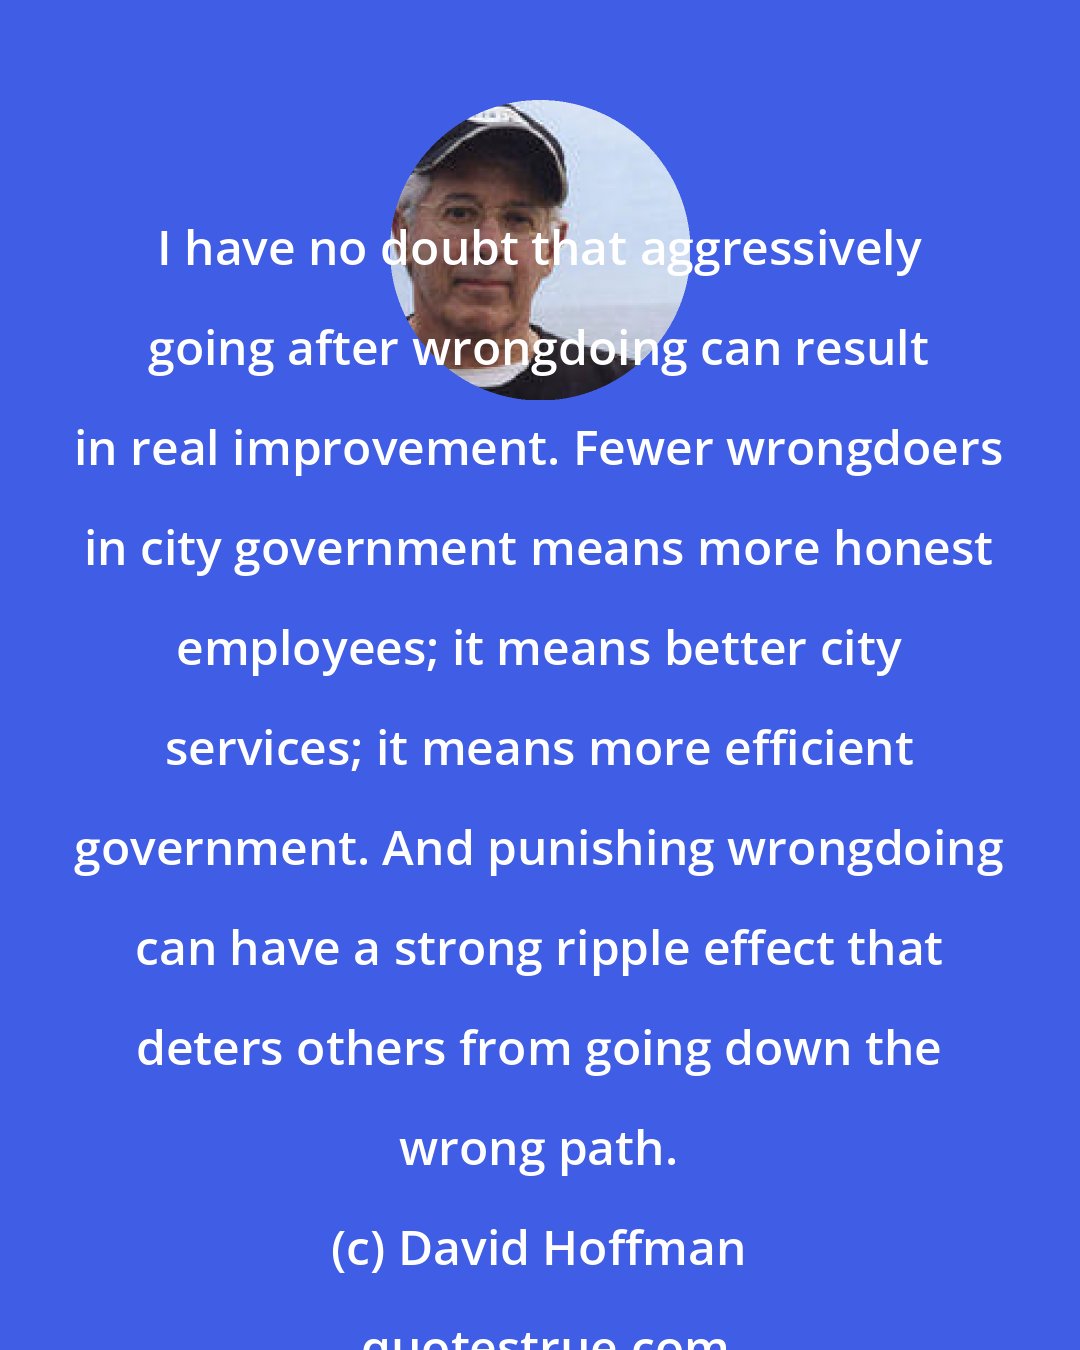 David Hoffman: I have no doubt that aggressively going after wrongdoing can result in real improvement. Fewer wrongdoers in city government means more honest employees; it means better city services; it means more efficient government. And punishing wrongdoing can have a strong ripple effect that deters others from going down the wrong path.